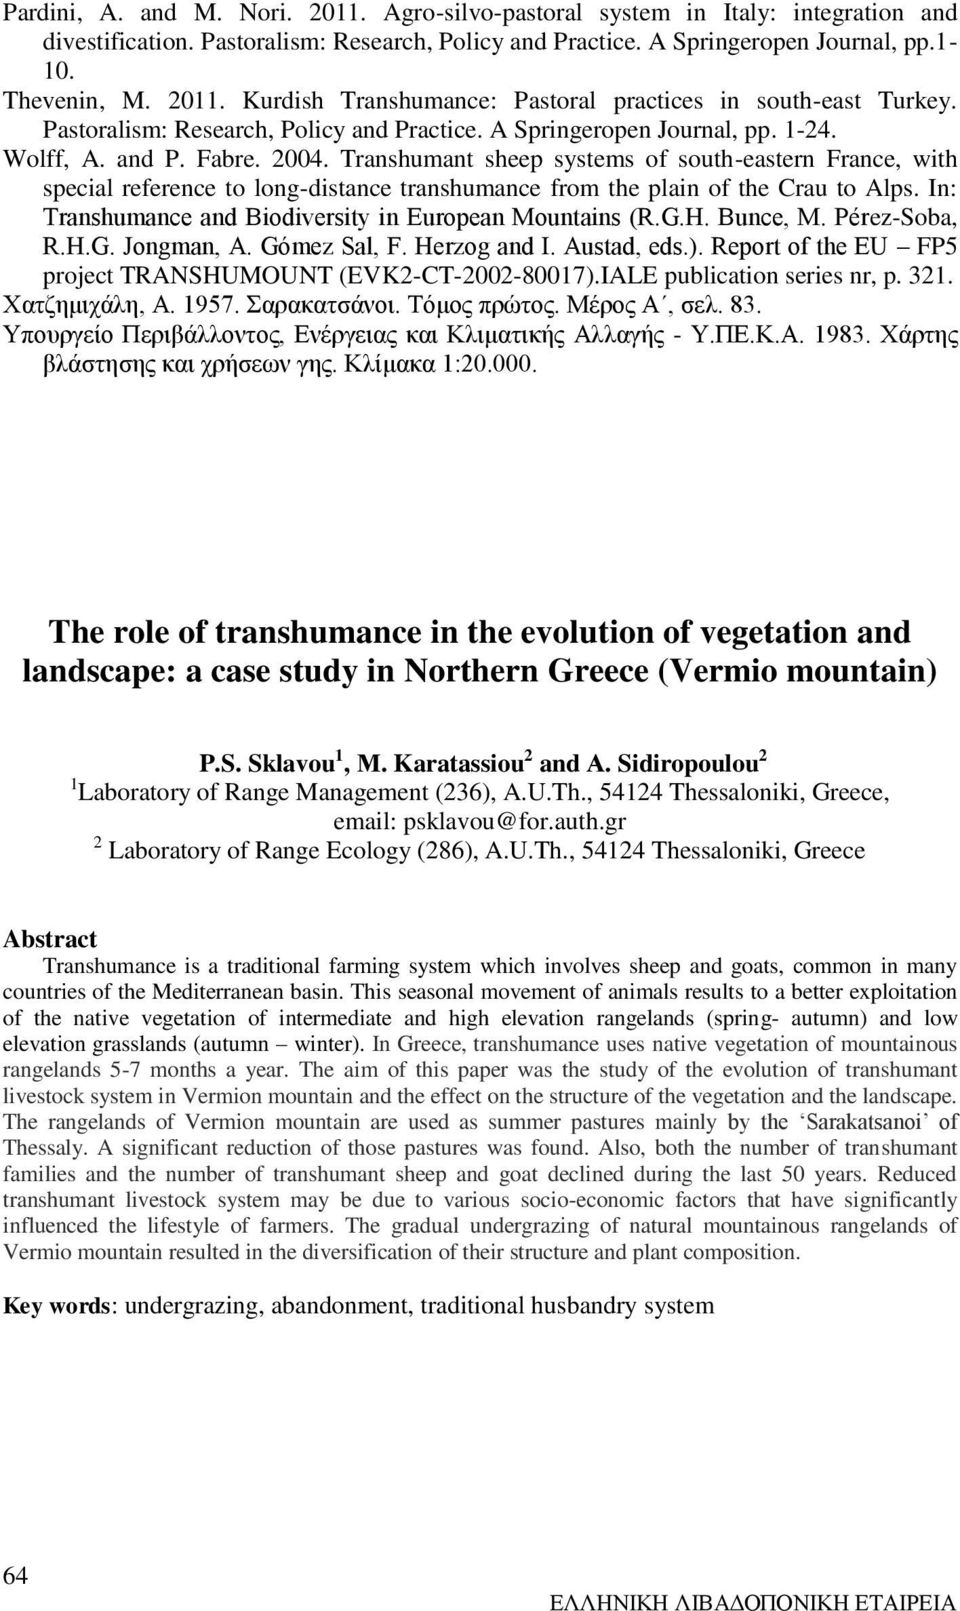 Transhumant sheep systems of south-eastern France, with special reference to long-distance transhumance from the plain of the Crau to Alps. In: Transhumance and Biodiversity in European Mountains (R.